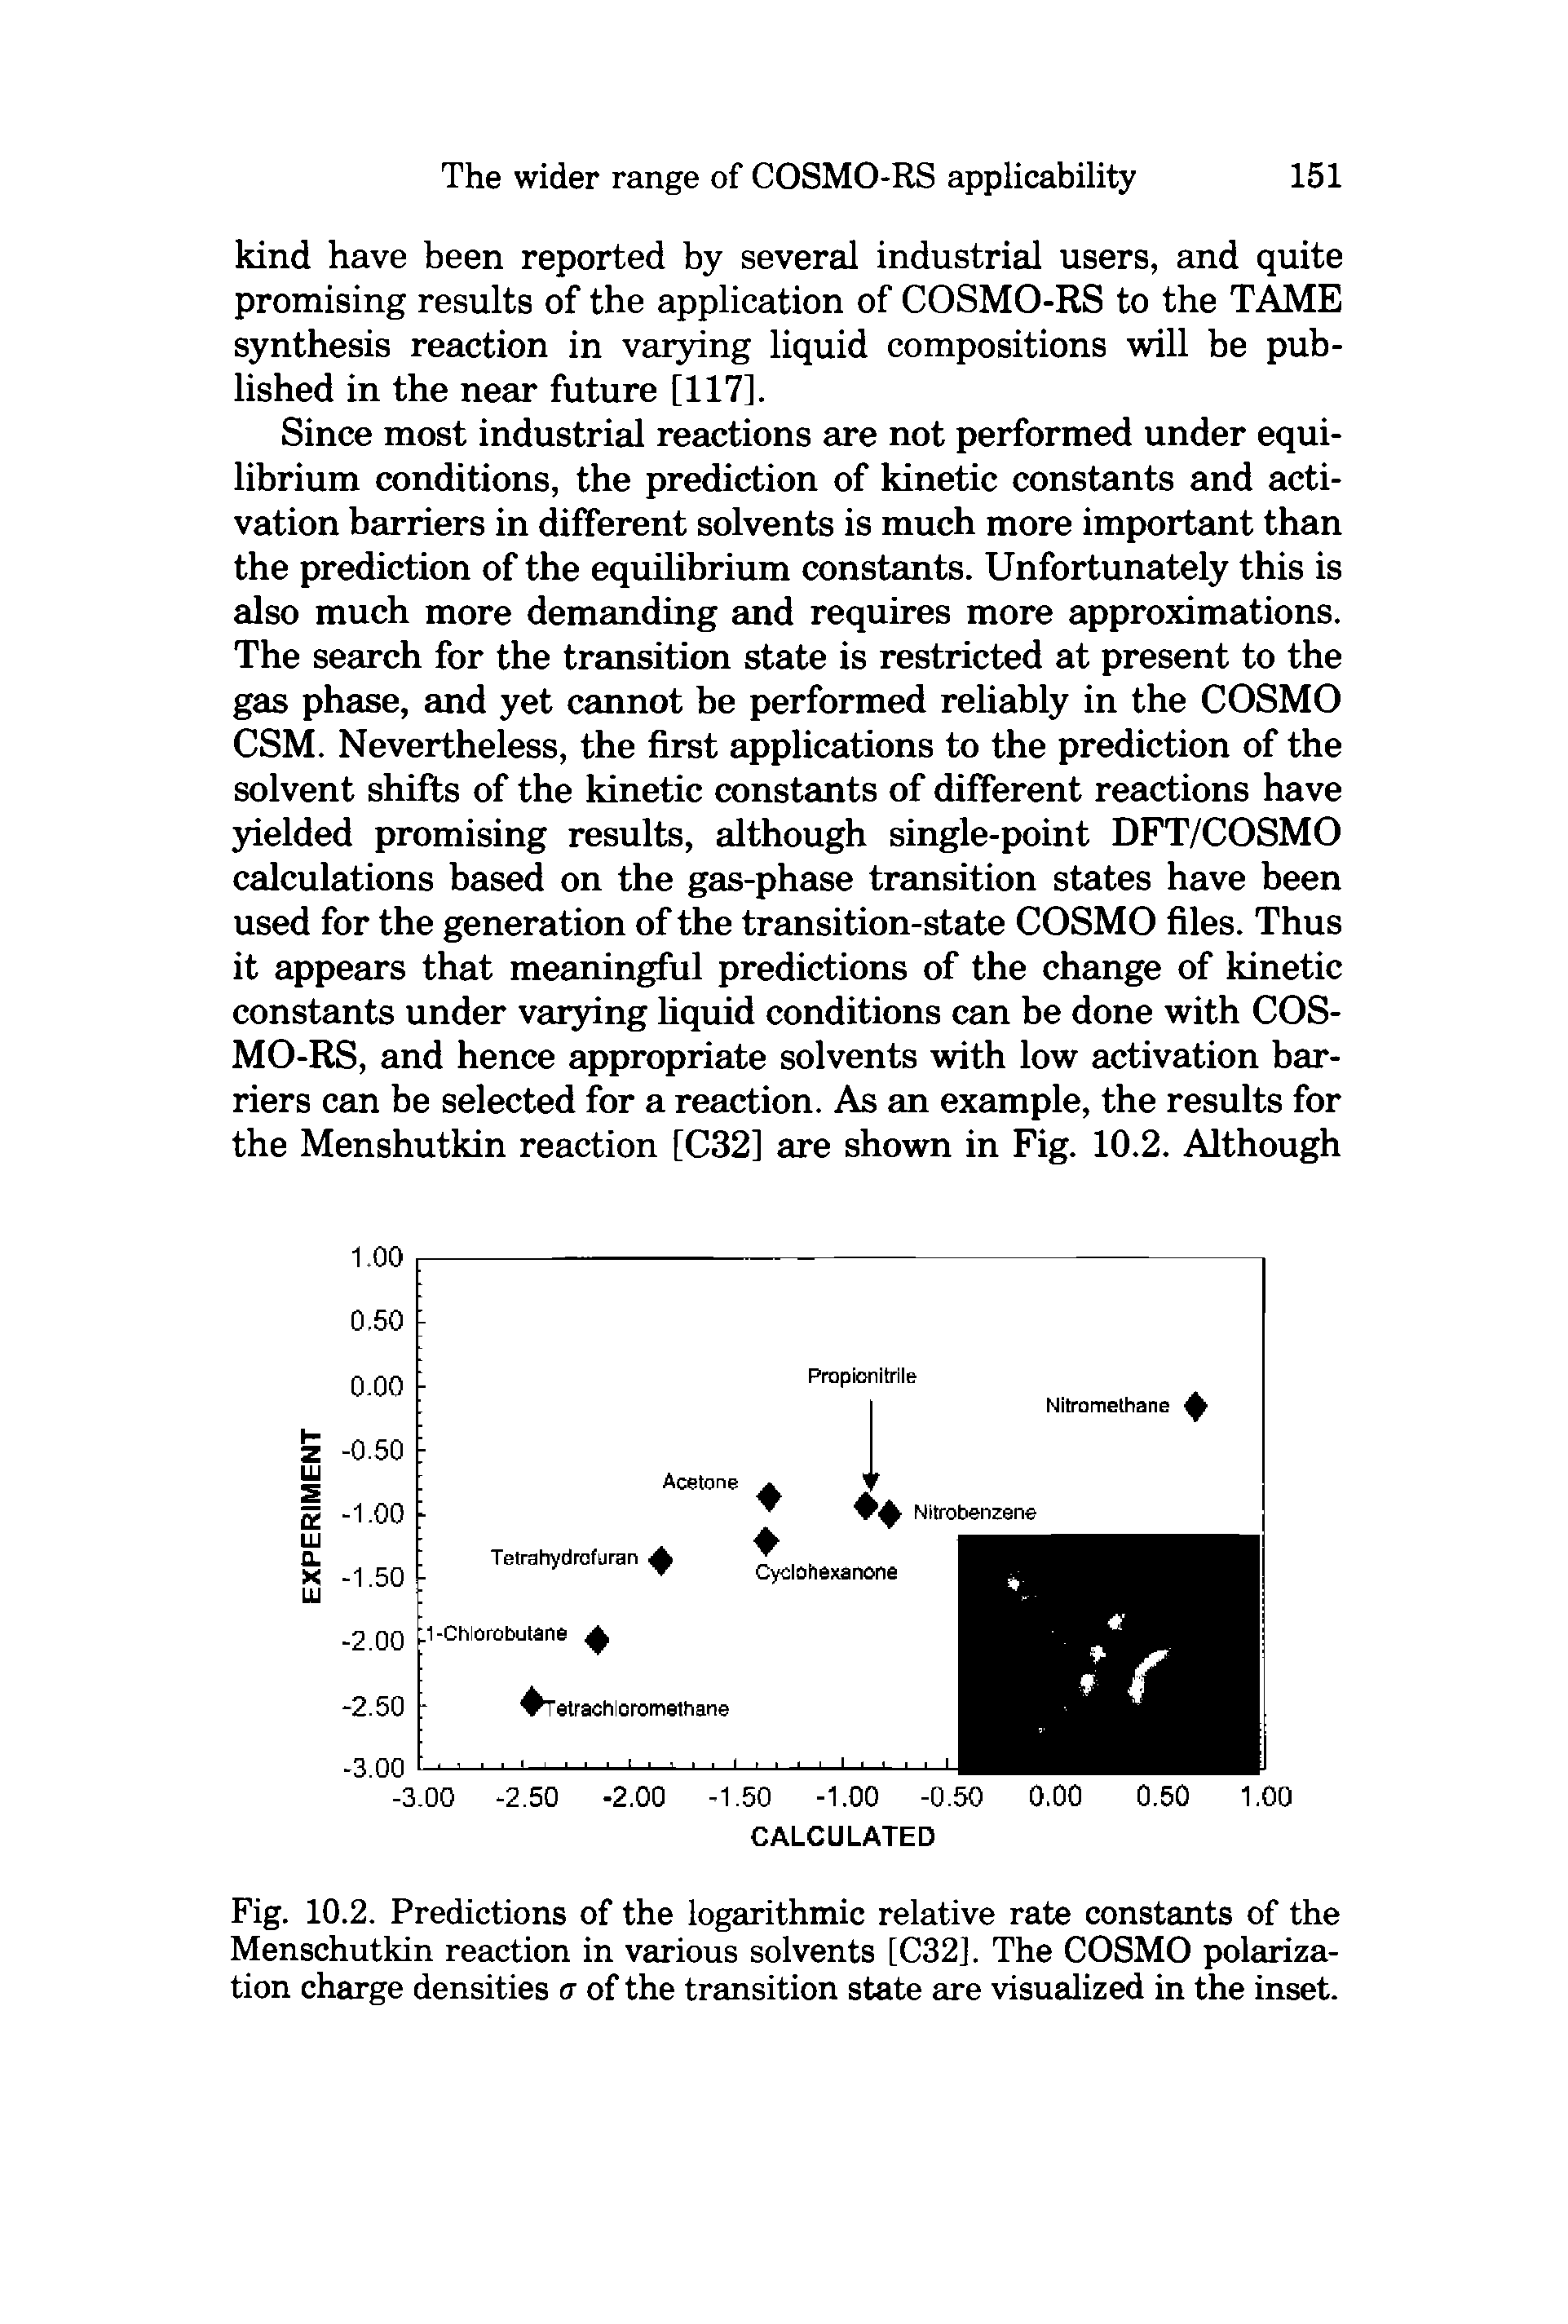 Fig. 10.2. Predictions of the logarithmic relative rate constants of the Menschutkin reaction in various solvents [C32]. The COSMO polarization charge densities a of the transition state are visualized in the inset.